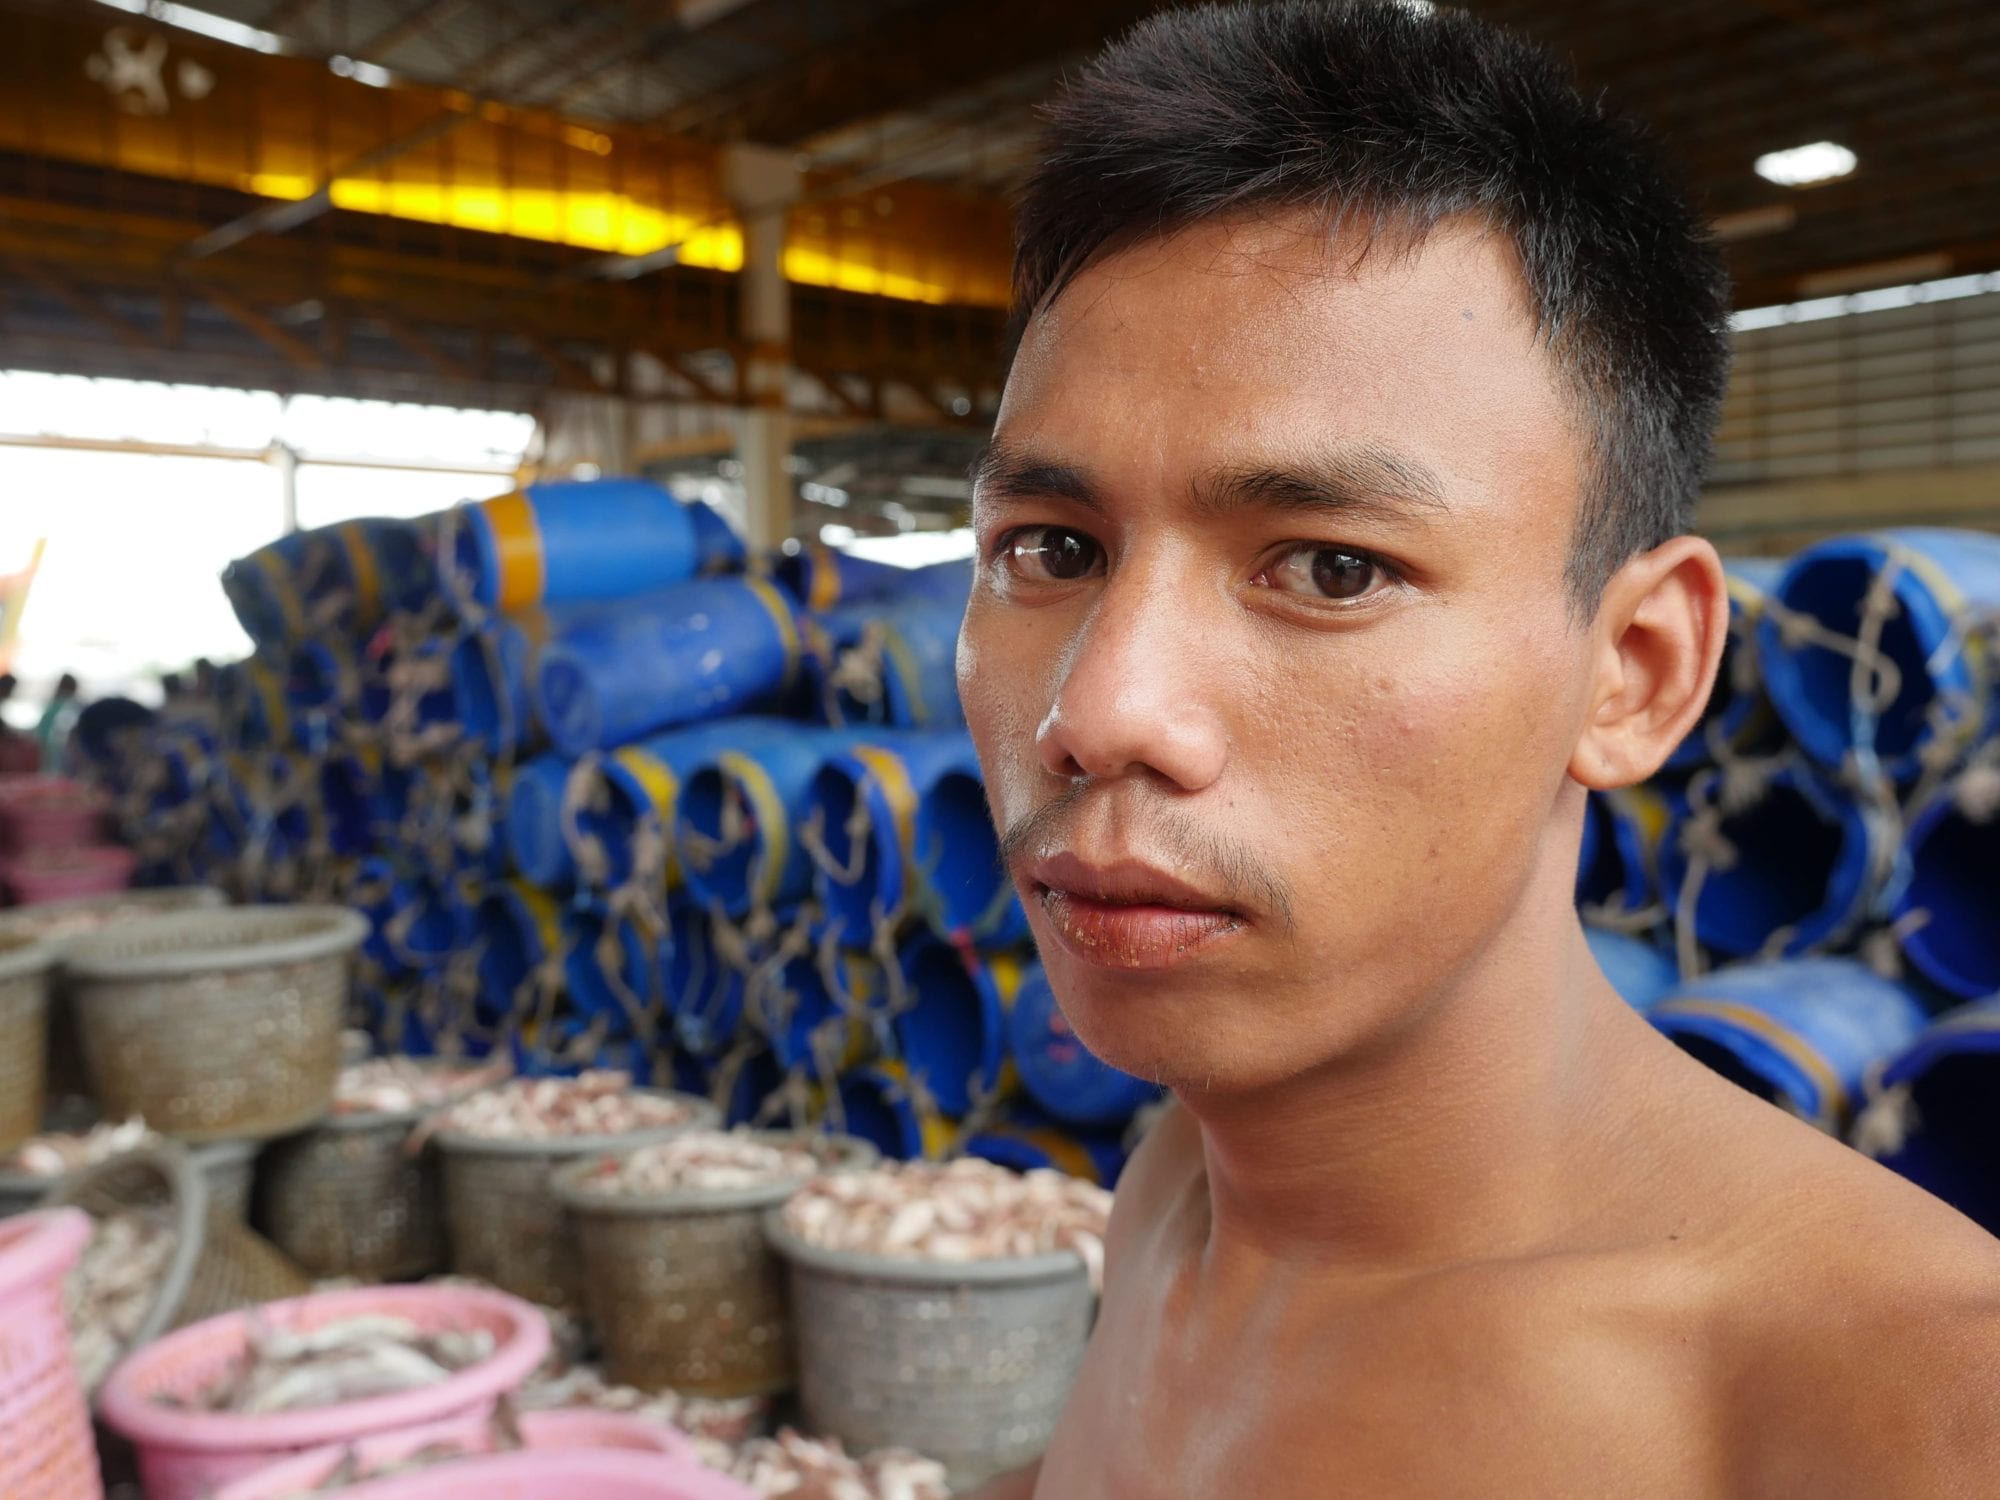 In Thailand, Burmese Migrant Workers Toil Without Rights